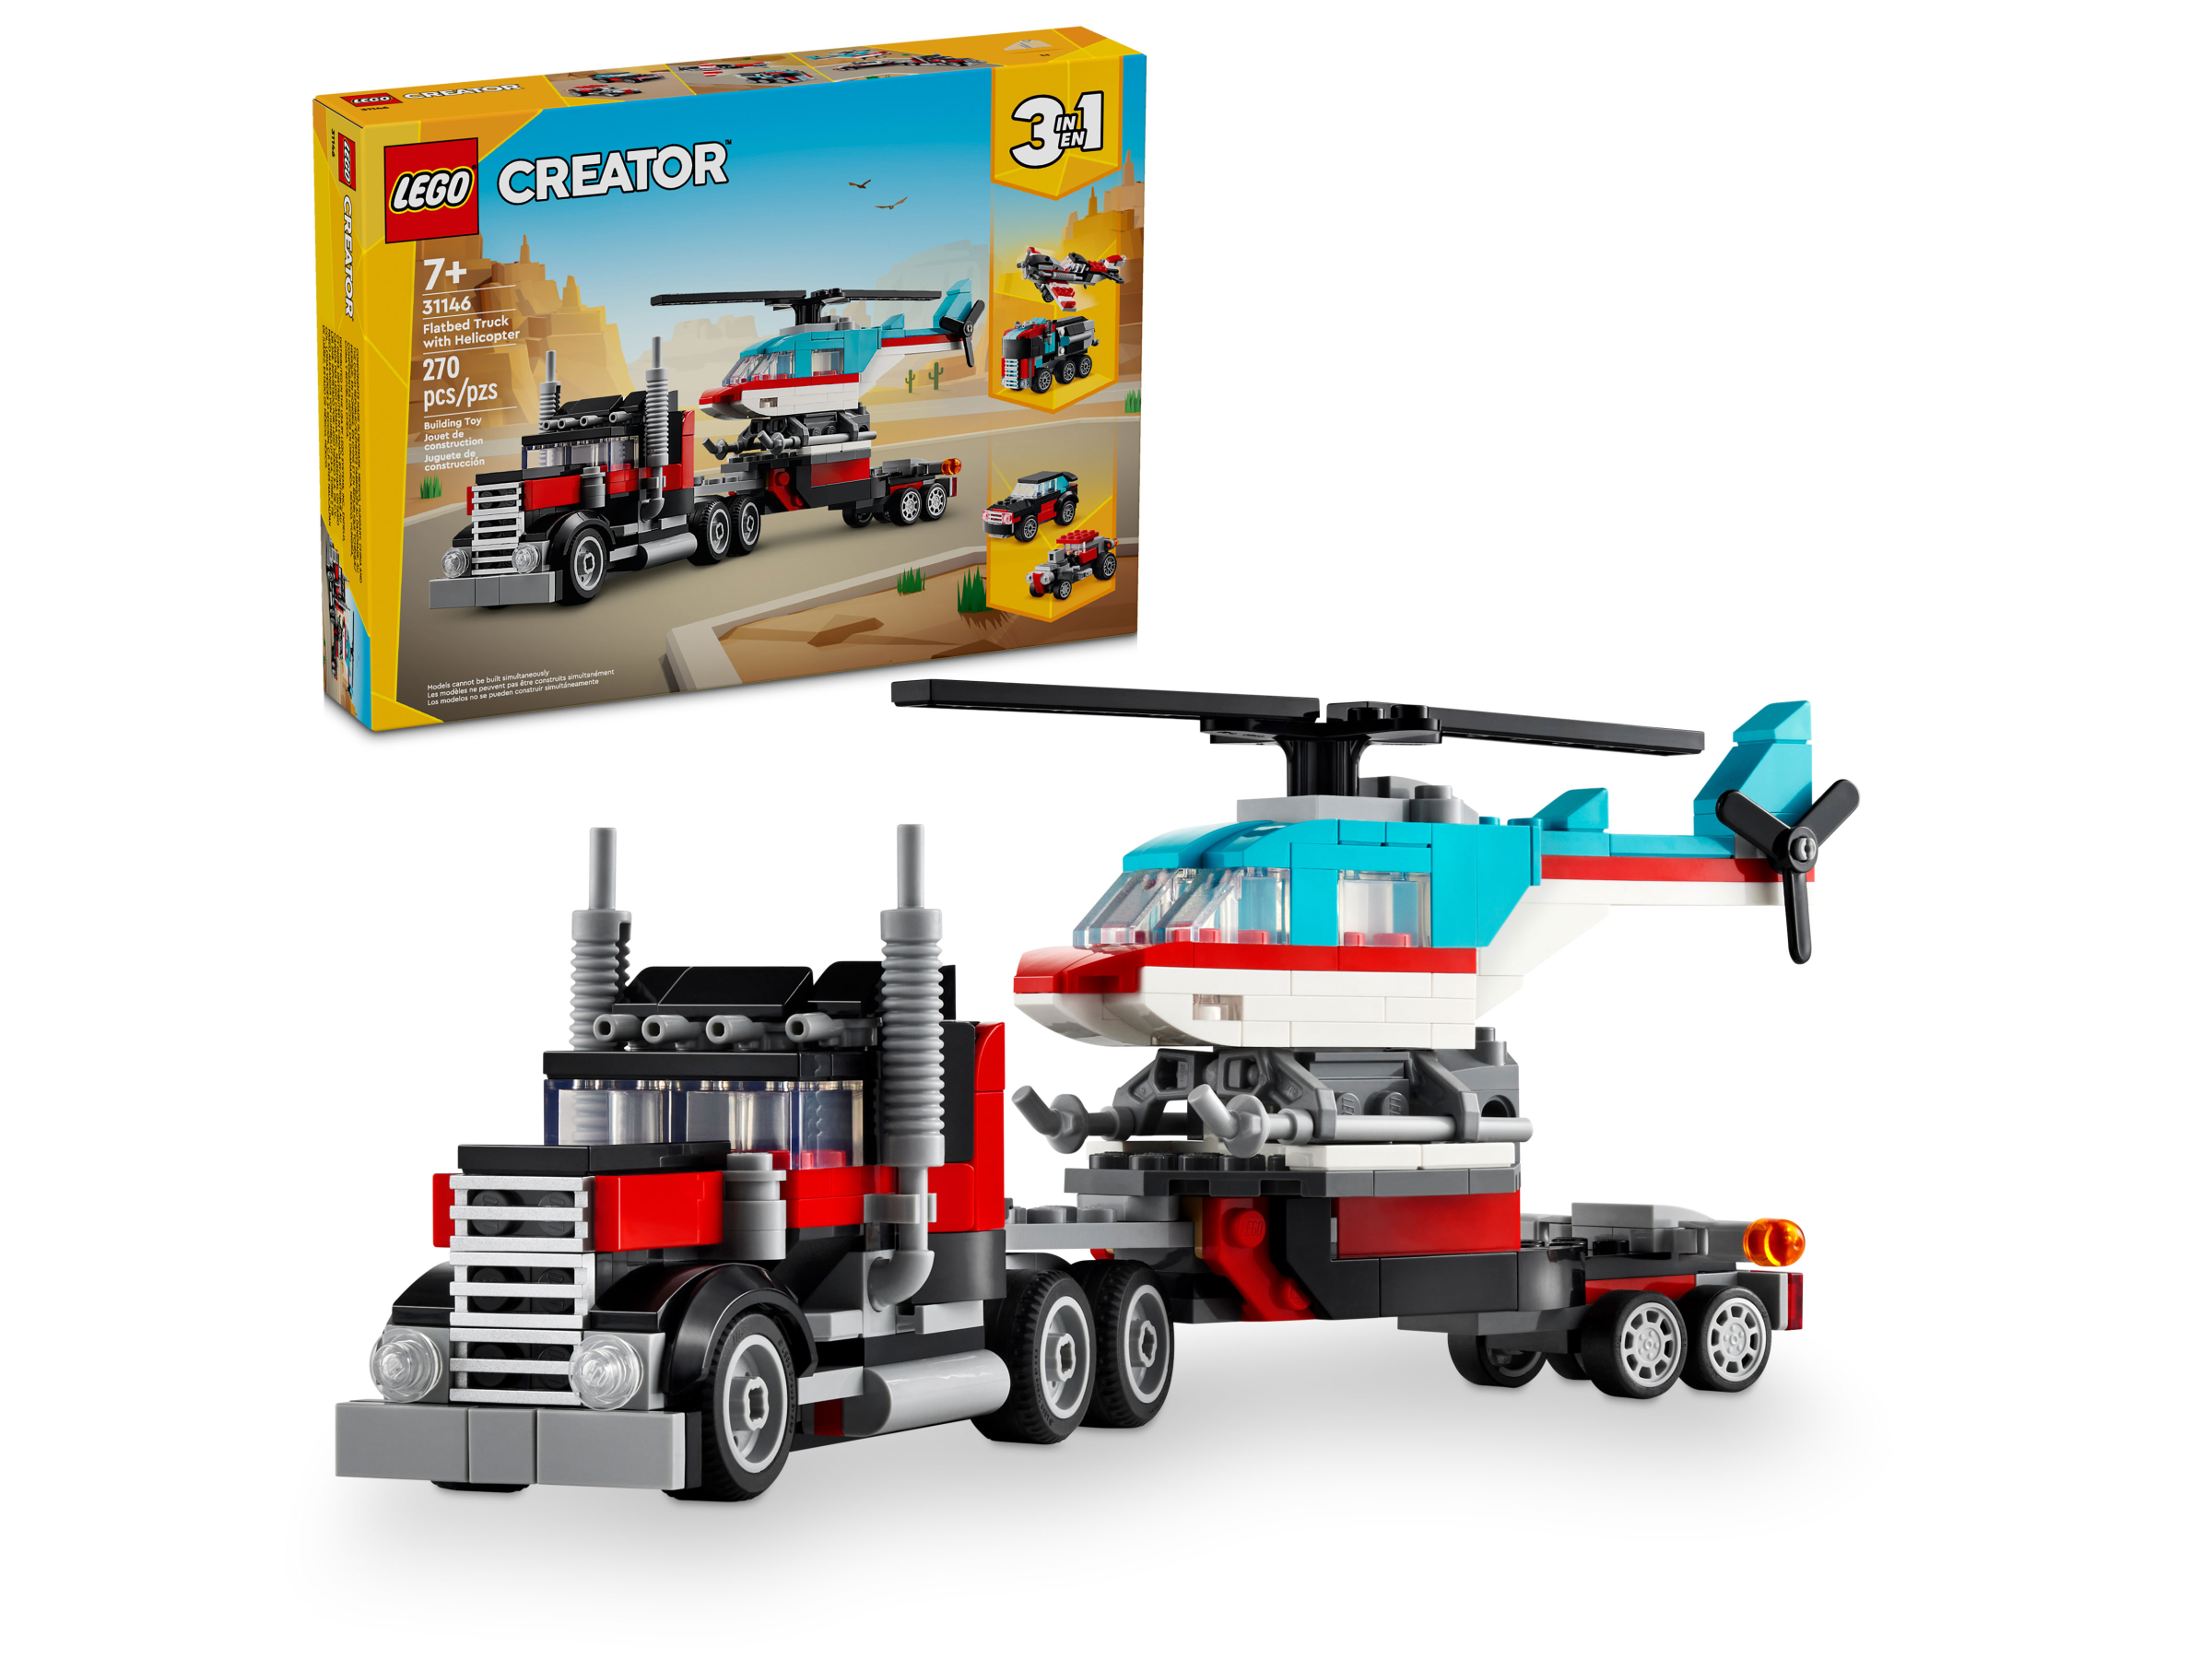 Flatbed Truck with Helicopter - A Child's Delight